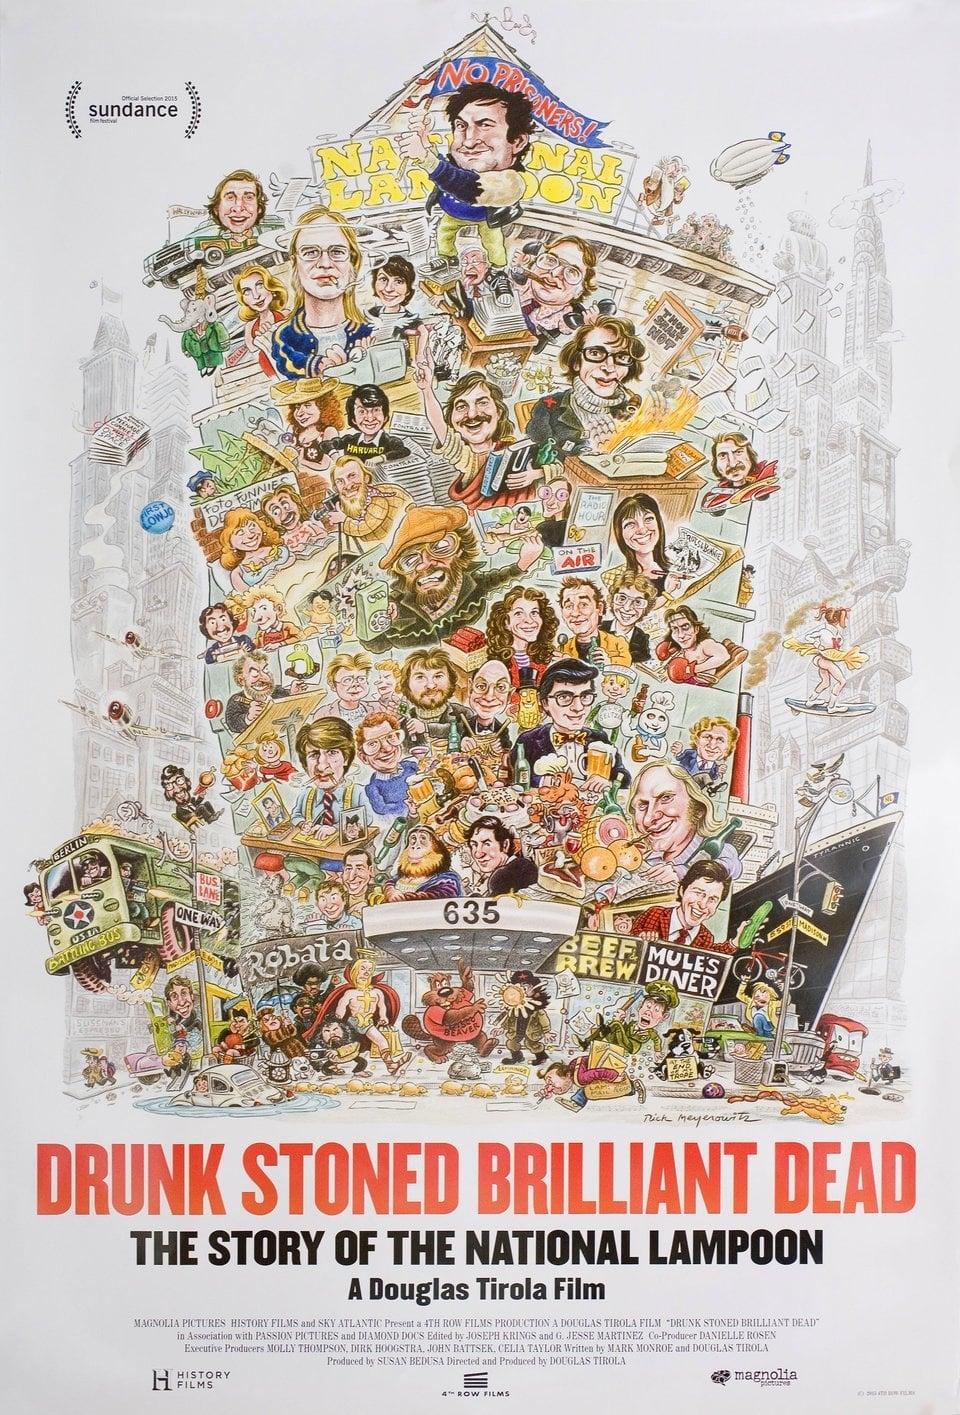 Drunk Stoned Brilliant Dead: The Story of the National Lampoon poster